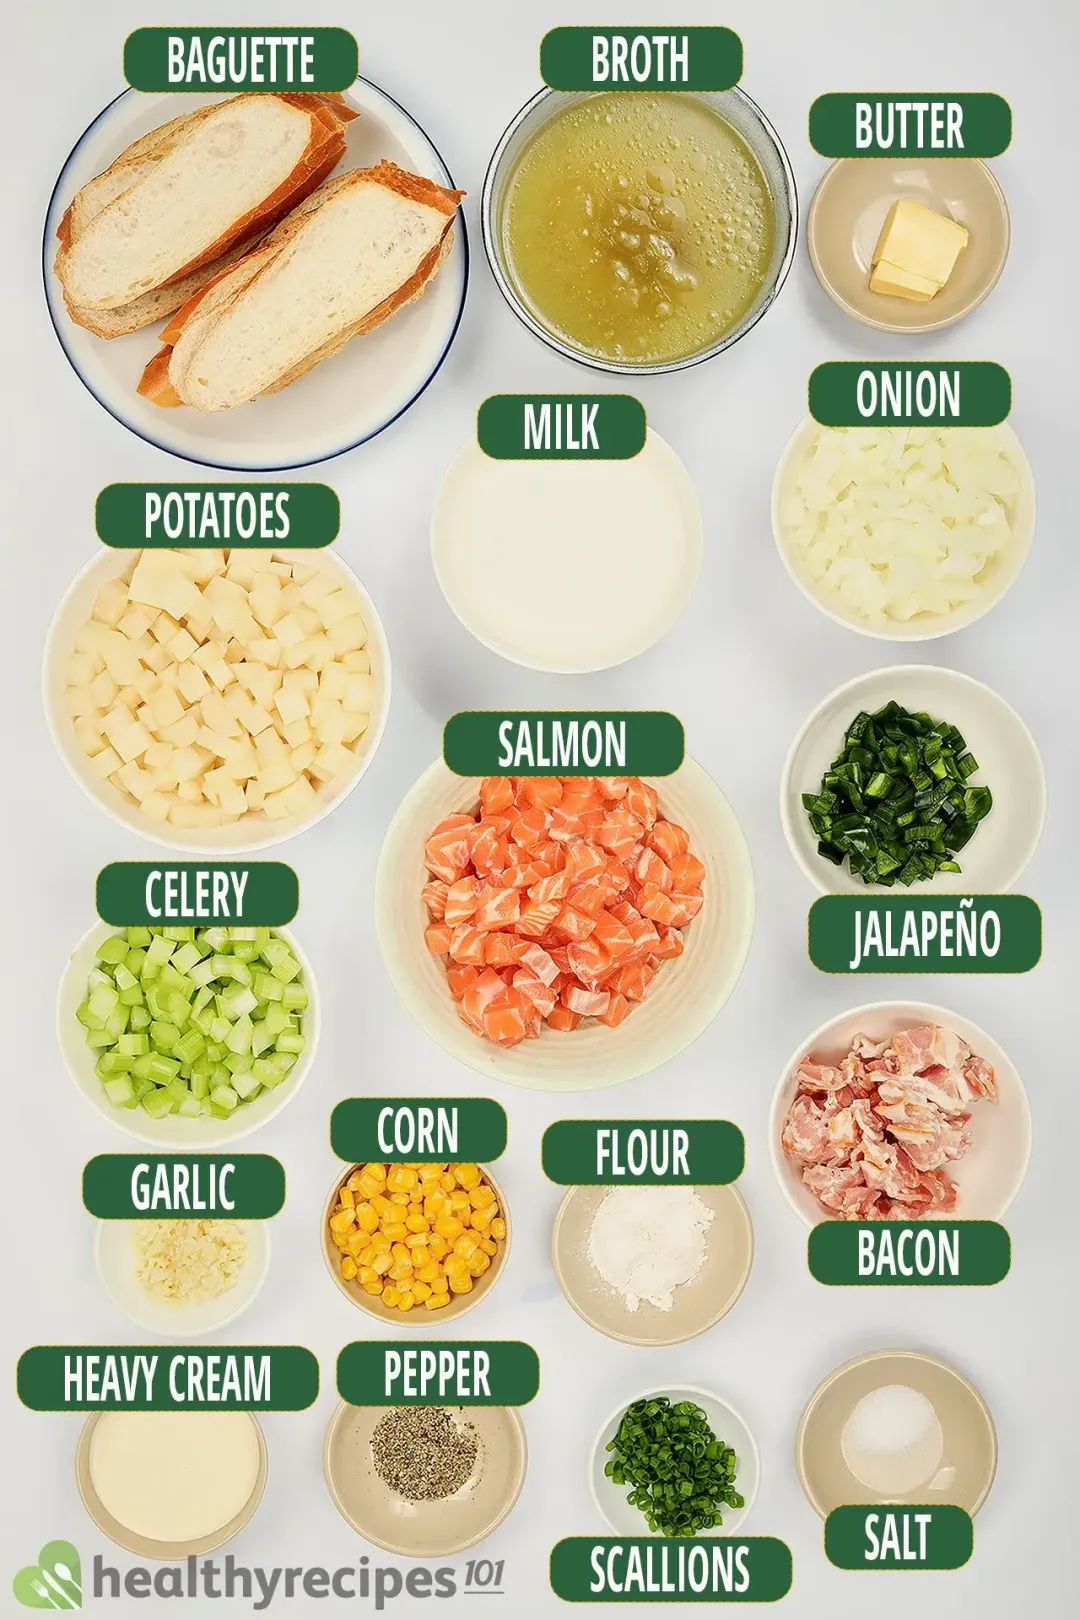 Ingredients for this salmon chowder: diced salmon, bacon, sliced baguette, broth, corn kernels, diced celery, diced potatoes, cubed jalapeno, diced onions, chopped scallions, heavy cream, other seasonings and herbs